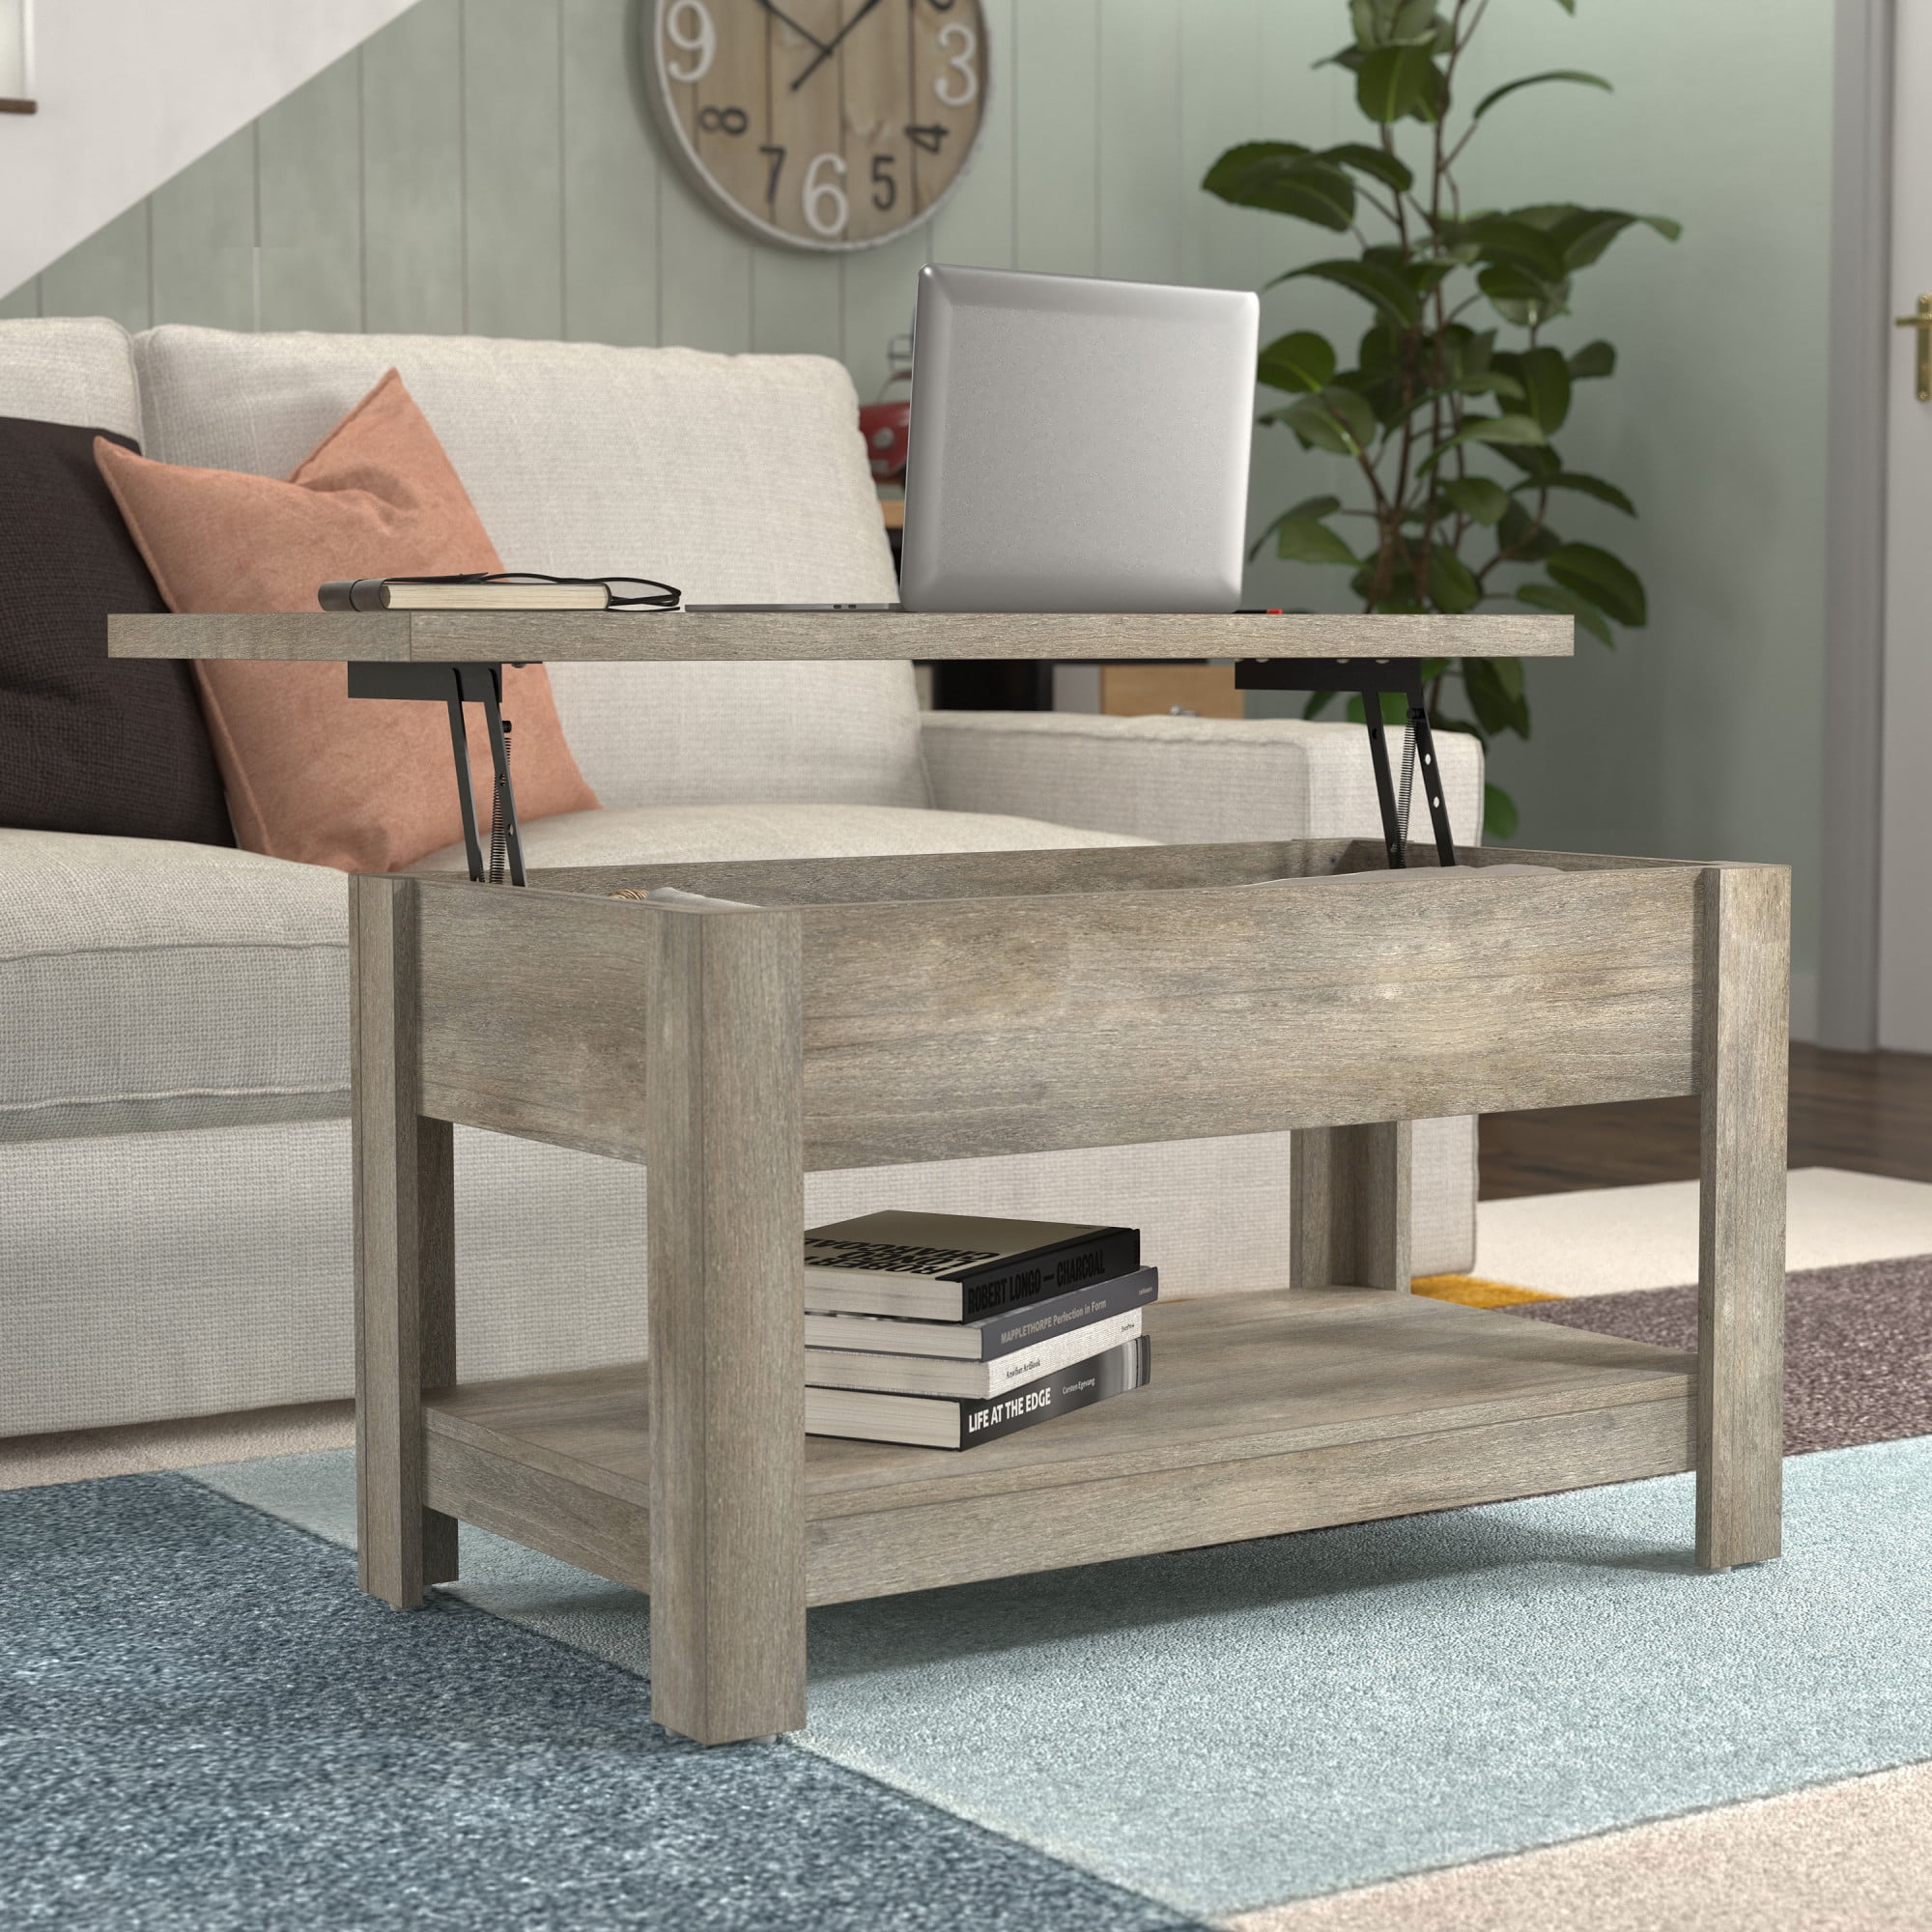 Buy Arcade Solid Wood Coffee Table in Walnut FinishOnline- At Home